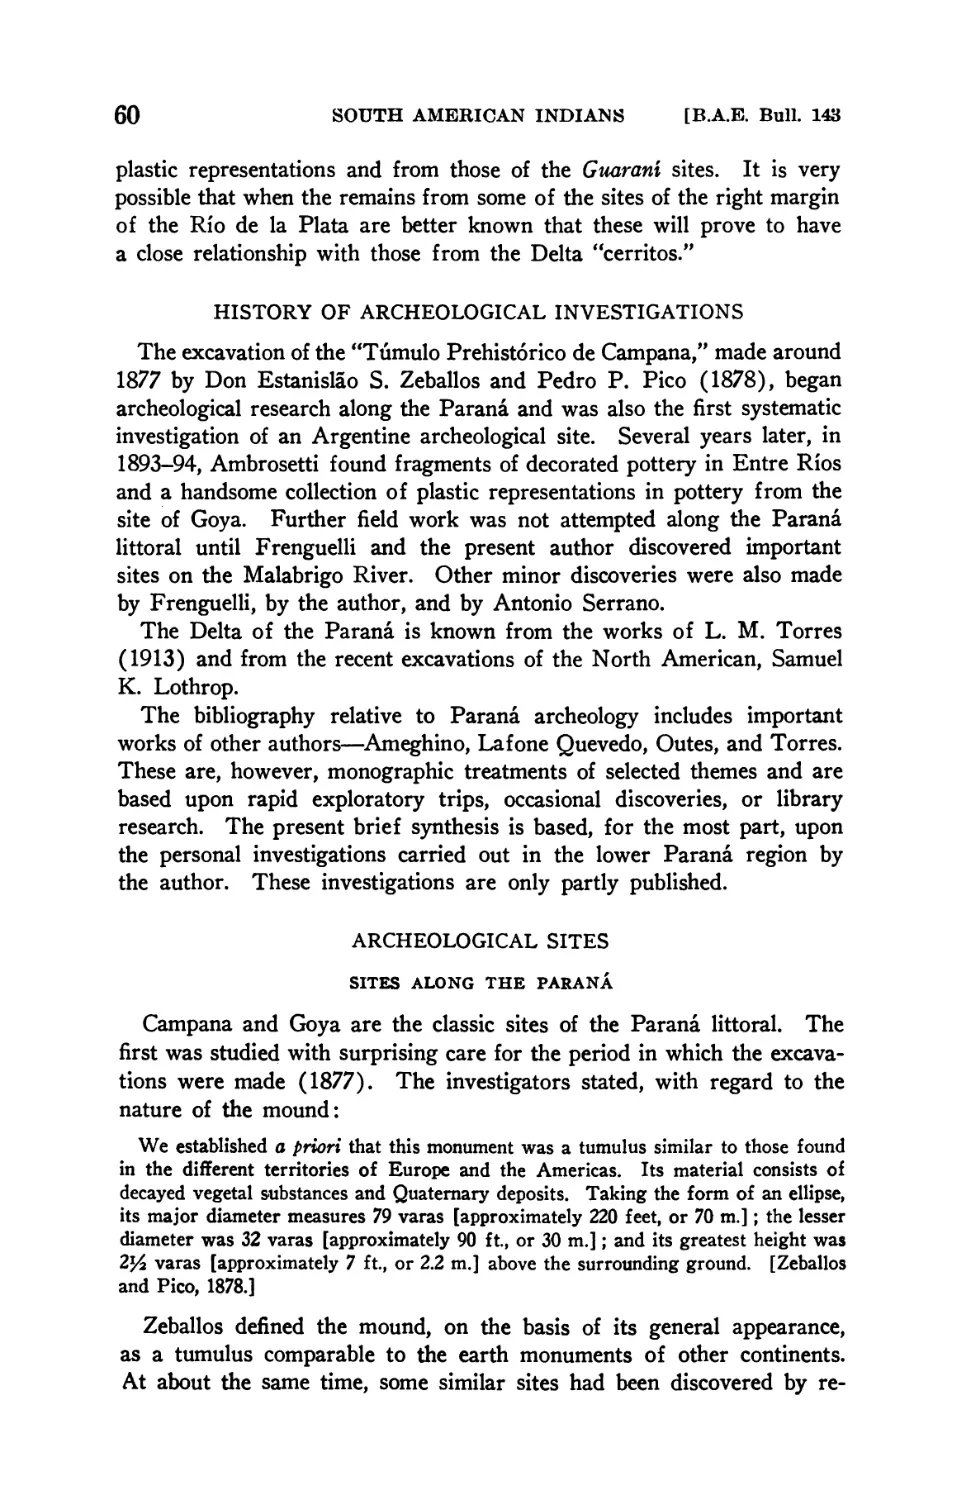 History of archeological investigations
Archeological sites